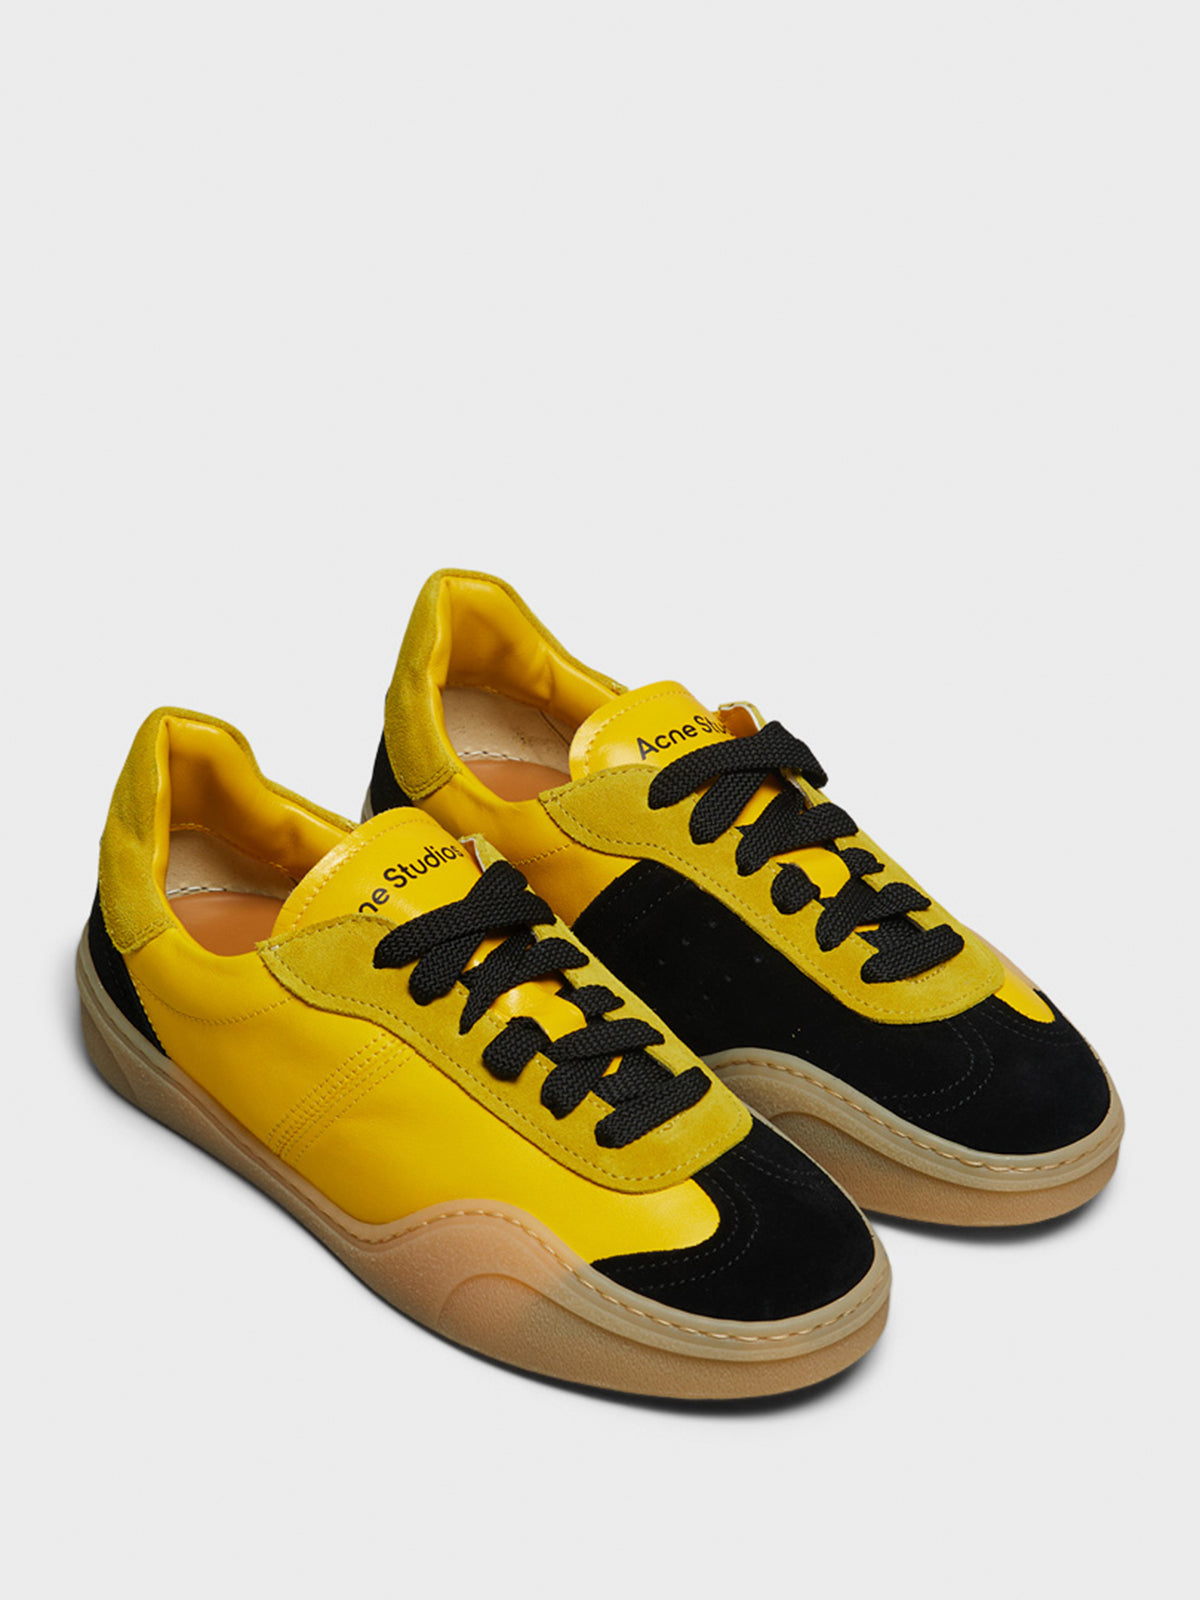 Women's Bars Sneakers in Yellow and Black